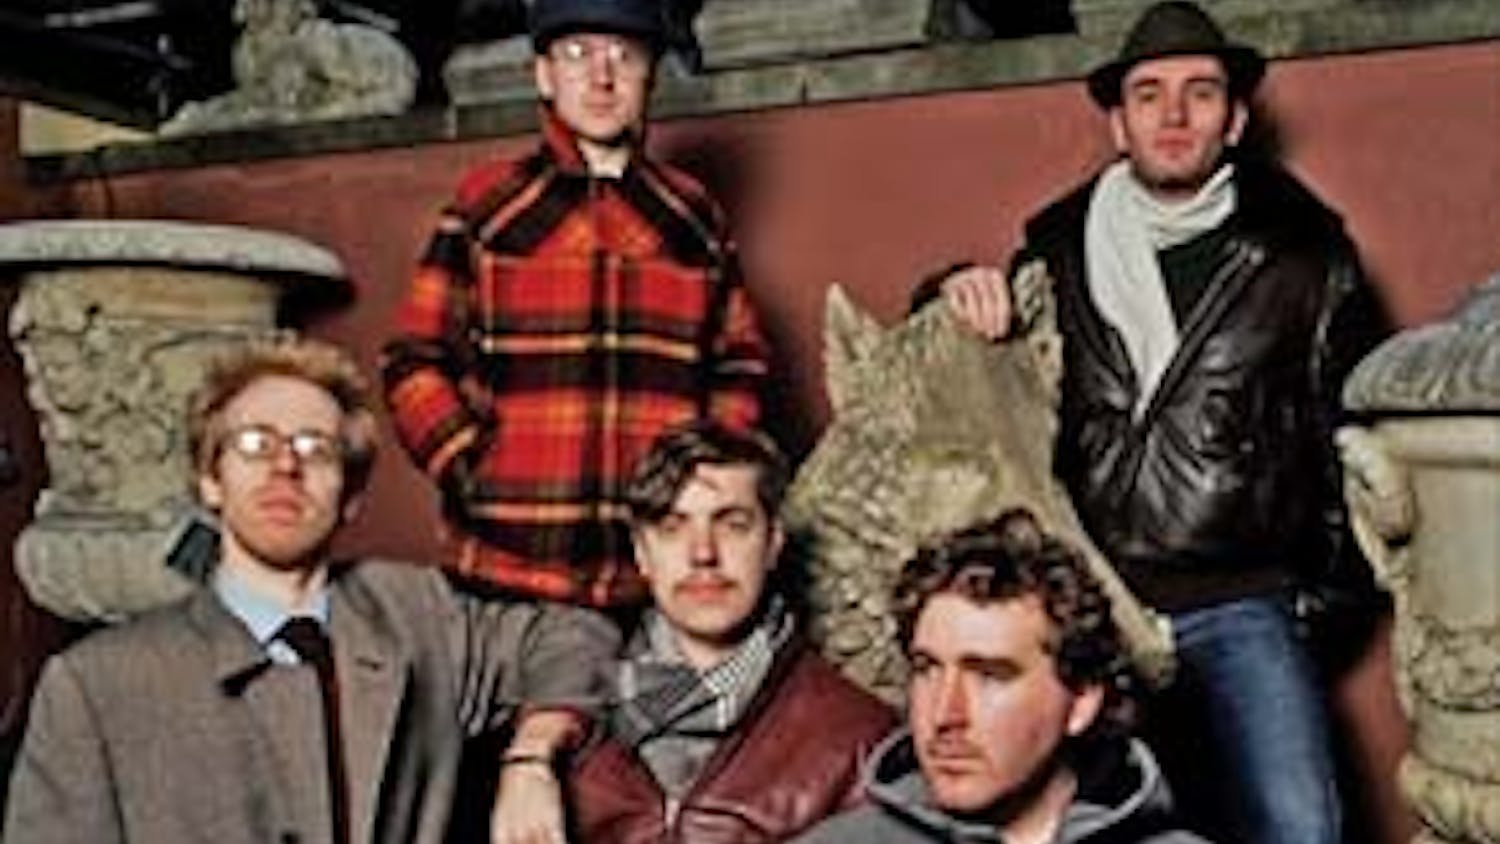 Hot Chip would like you to consider buying some exciting stone statuary along with its album.